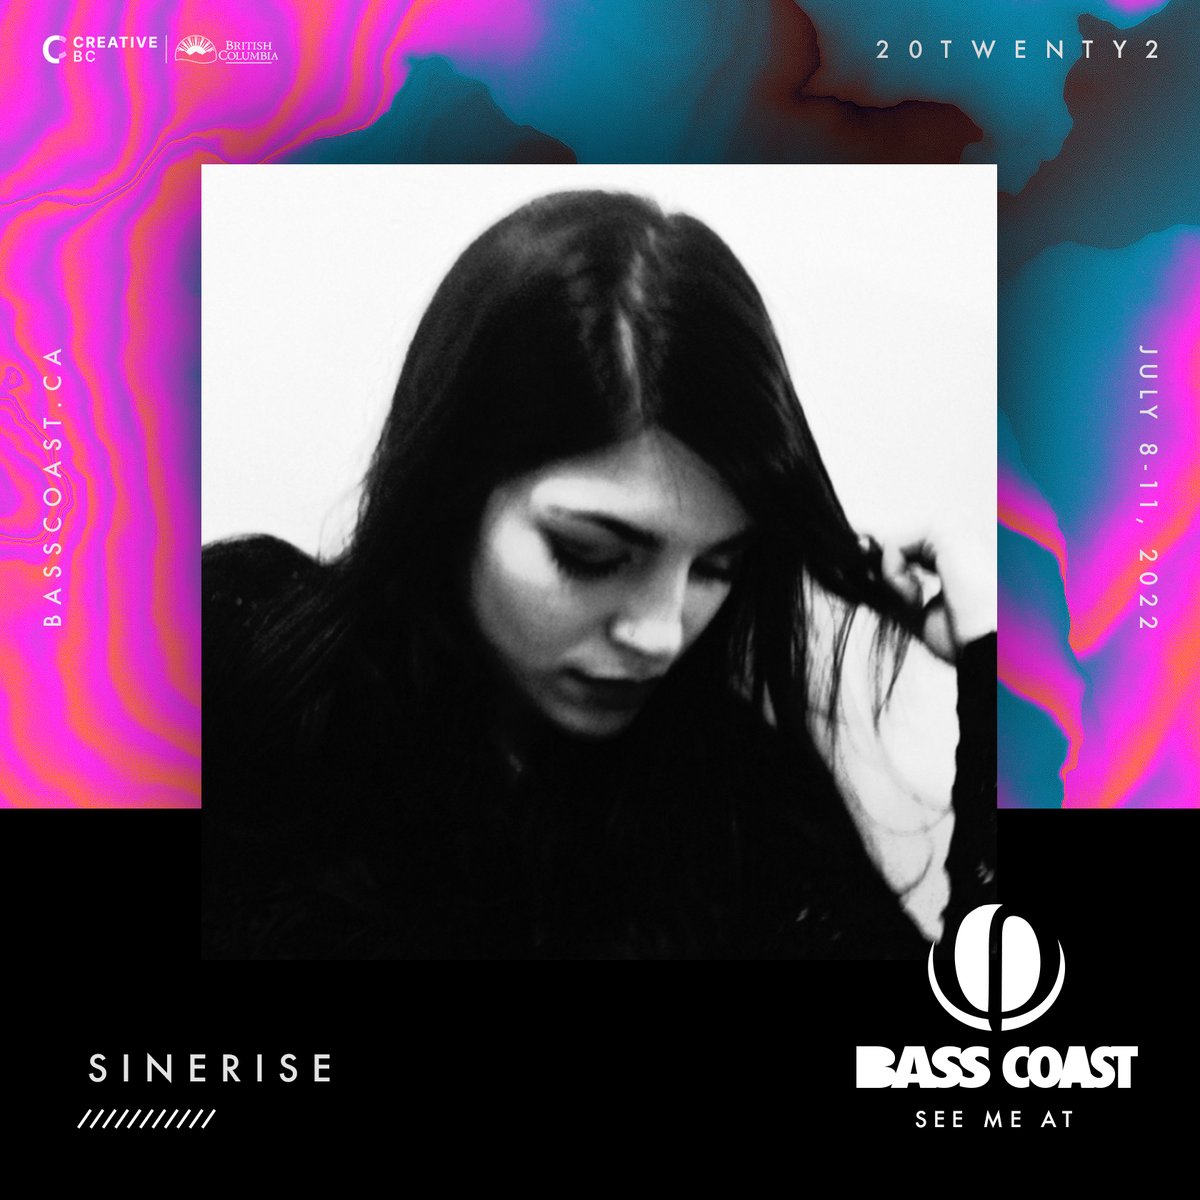 See you at Bass Coast 2022! Catch me after V.I.V.E.K on the Slow Tempo Stage Friday Night/Saturday Morning. #basscoast #takemetobasscoast #basscoast2022